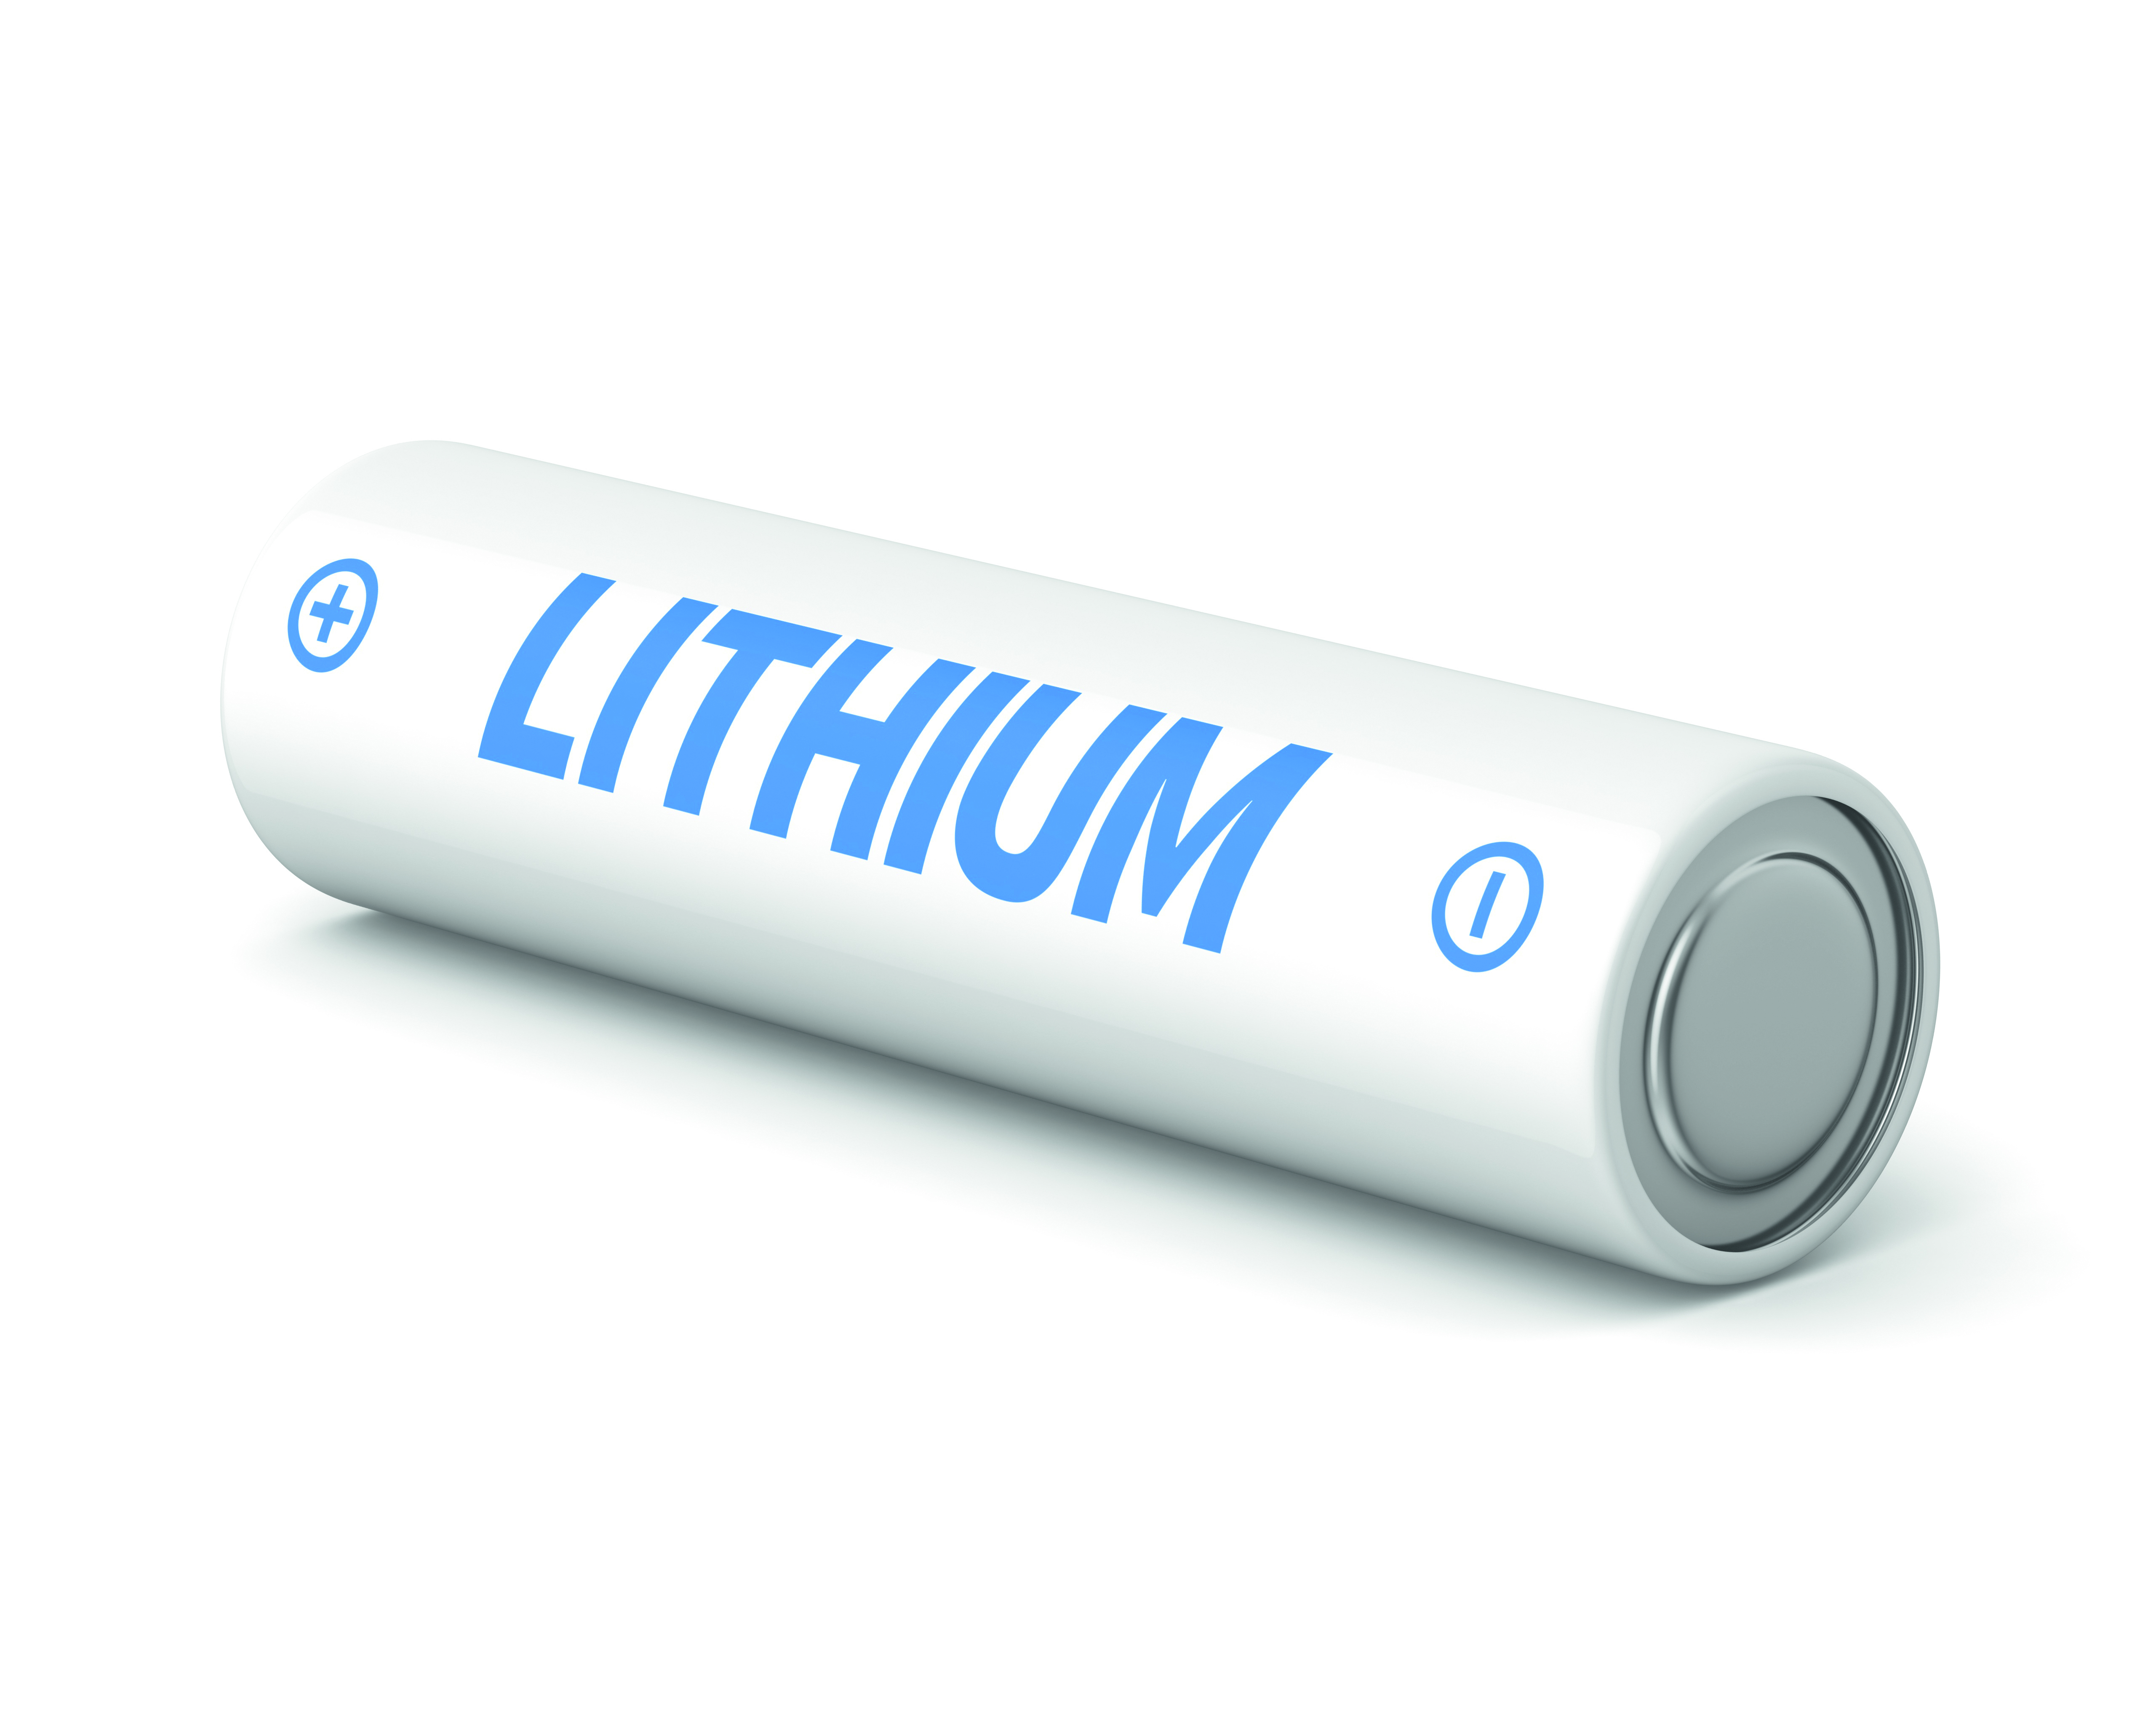 Lithium-ion batteries and the technology behind them